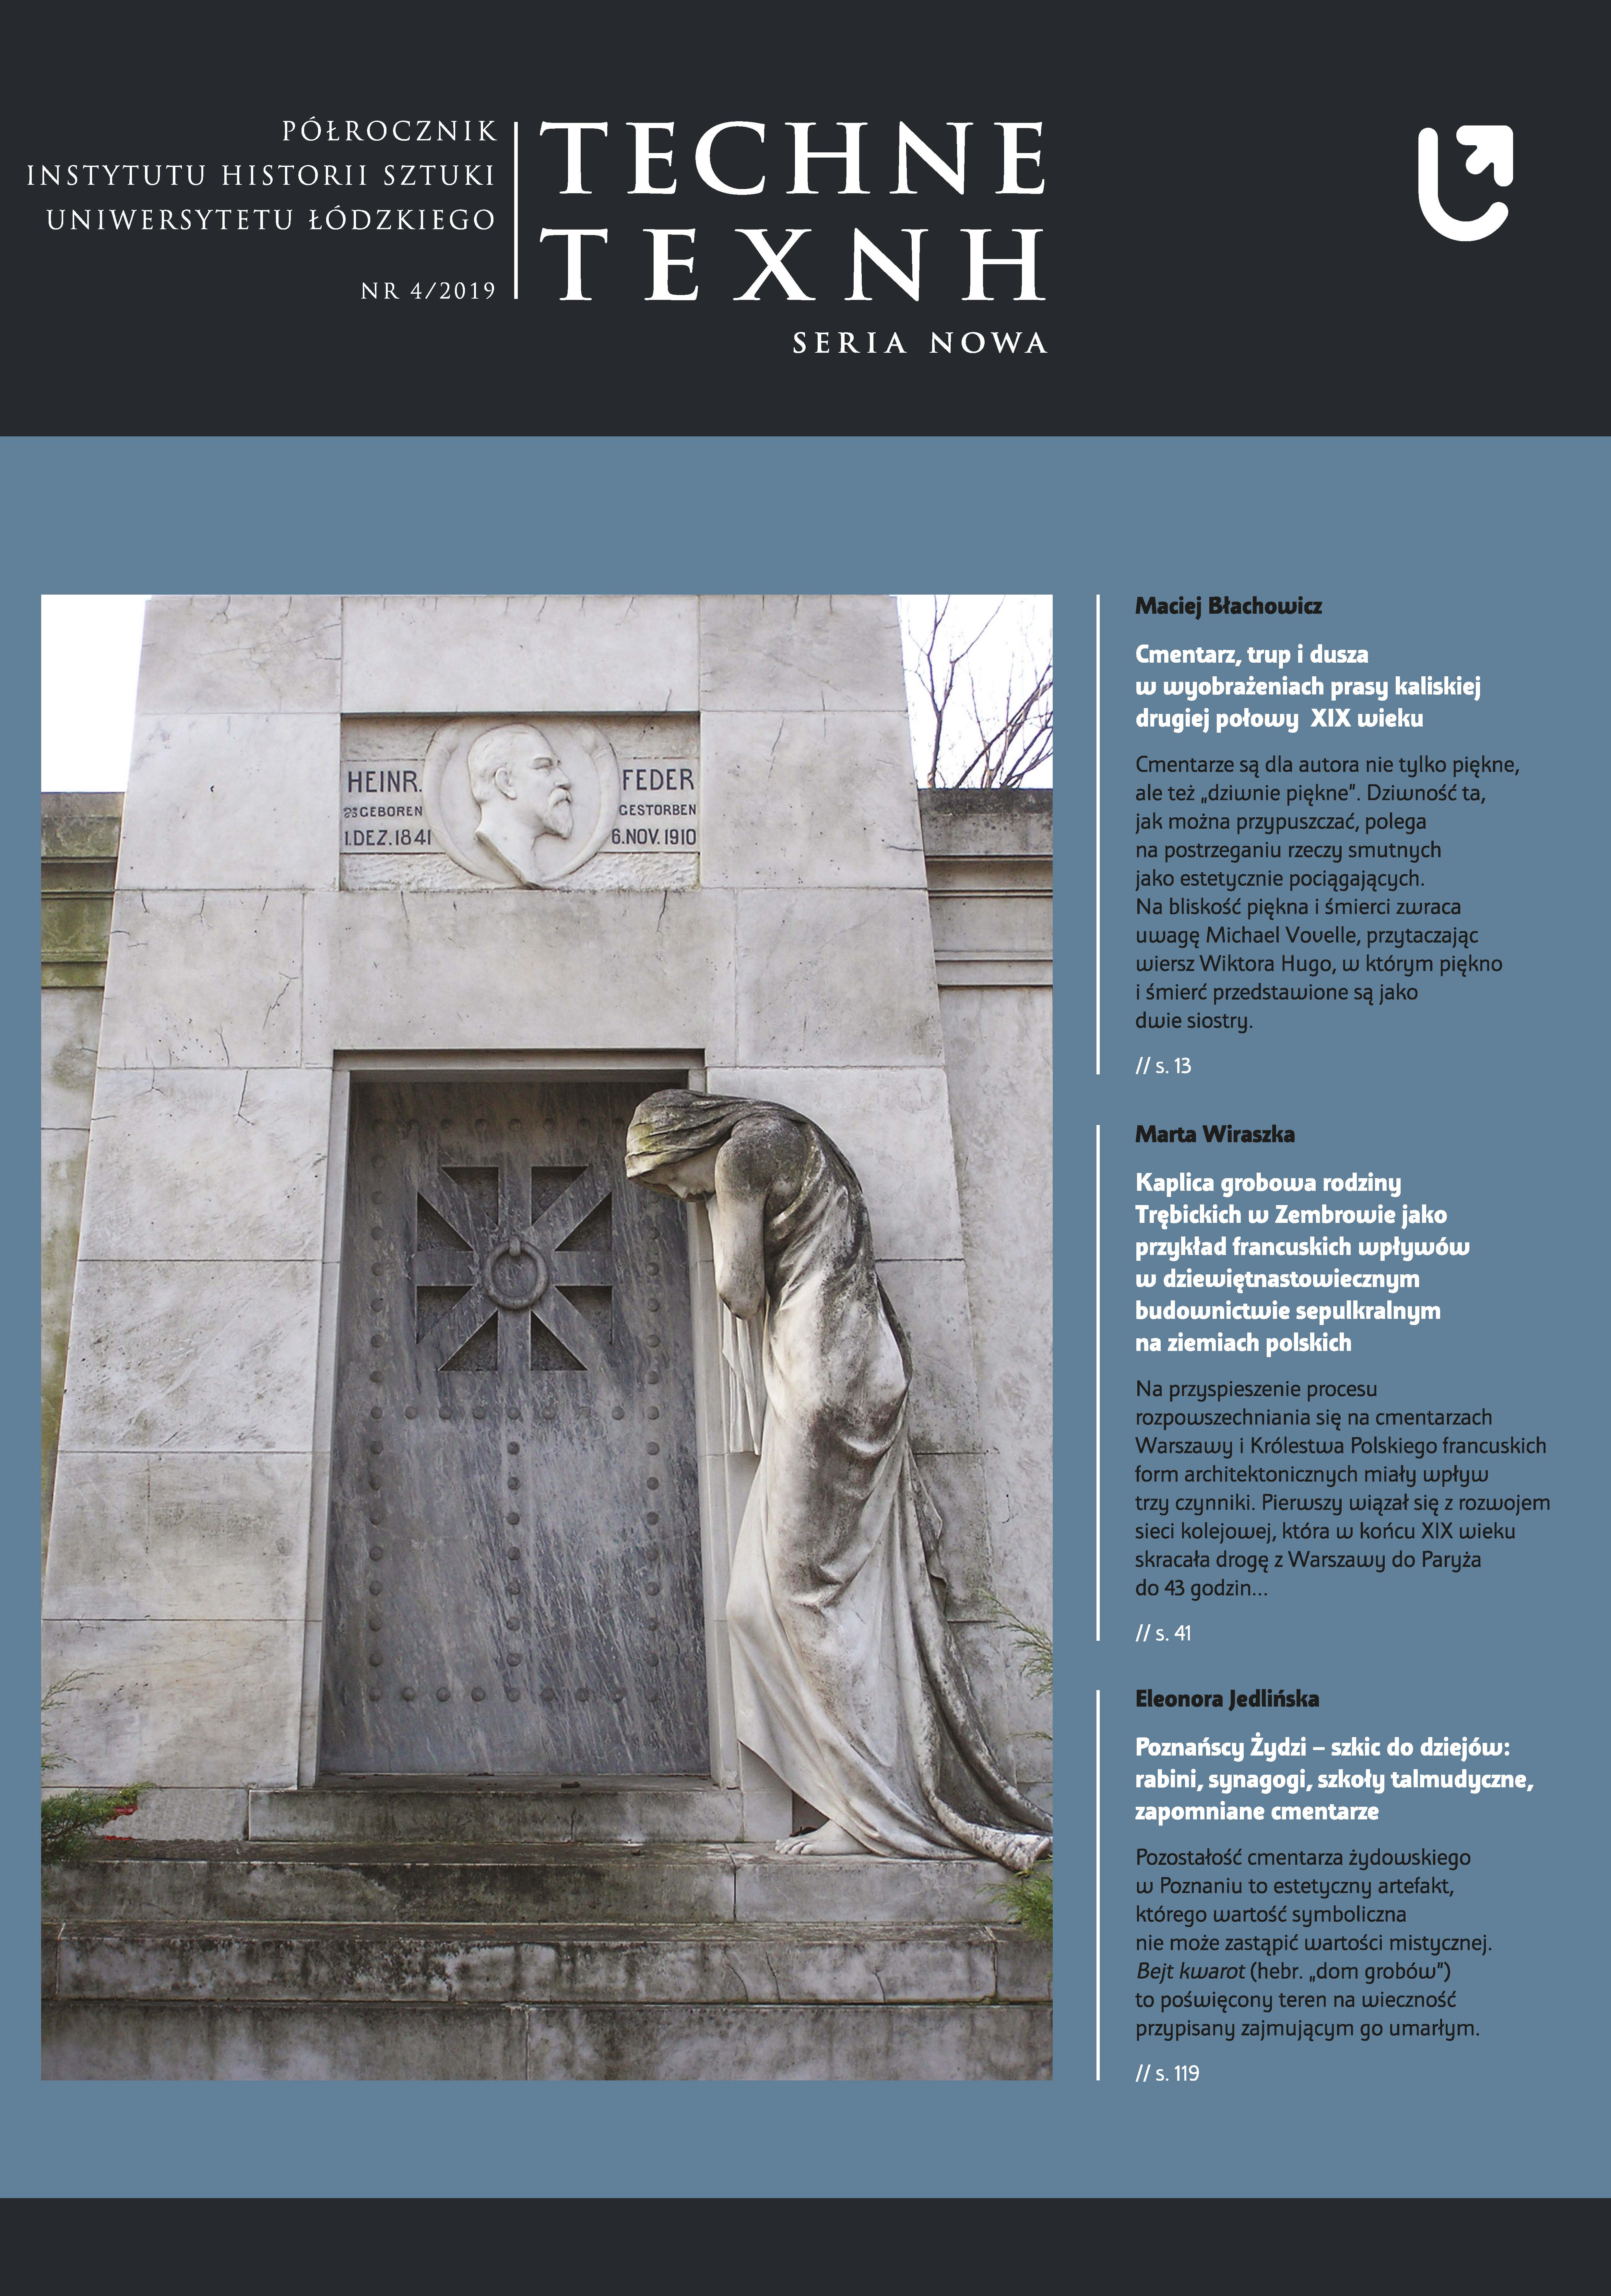 Evangelical-Augsburg Cemetery in Ozorków and monuments of the Schlösser family Cover Image